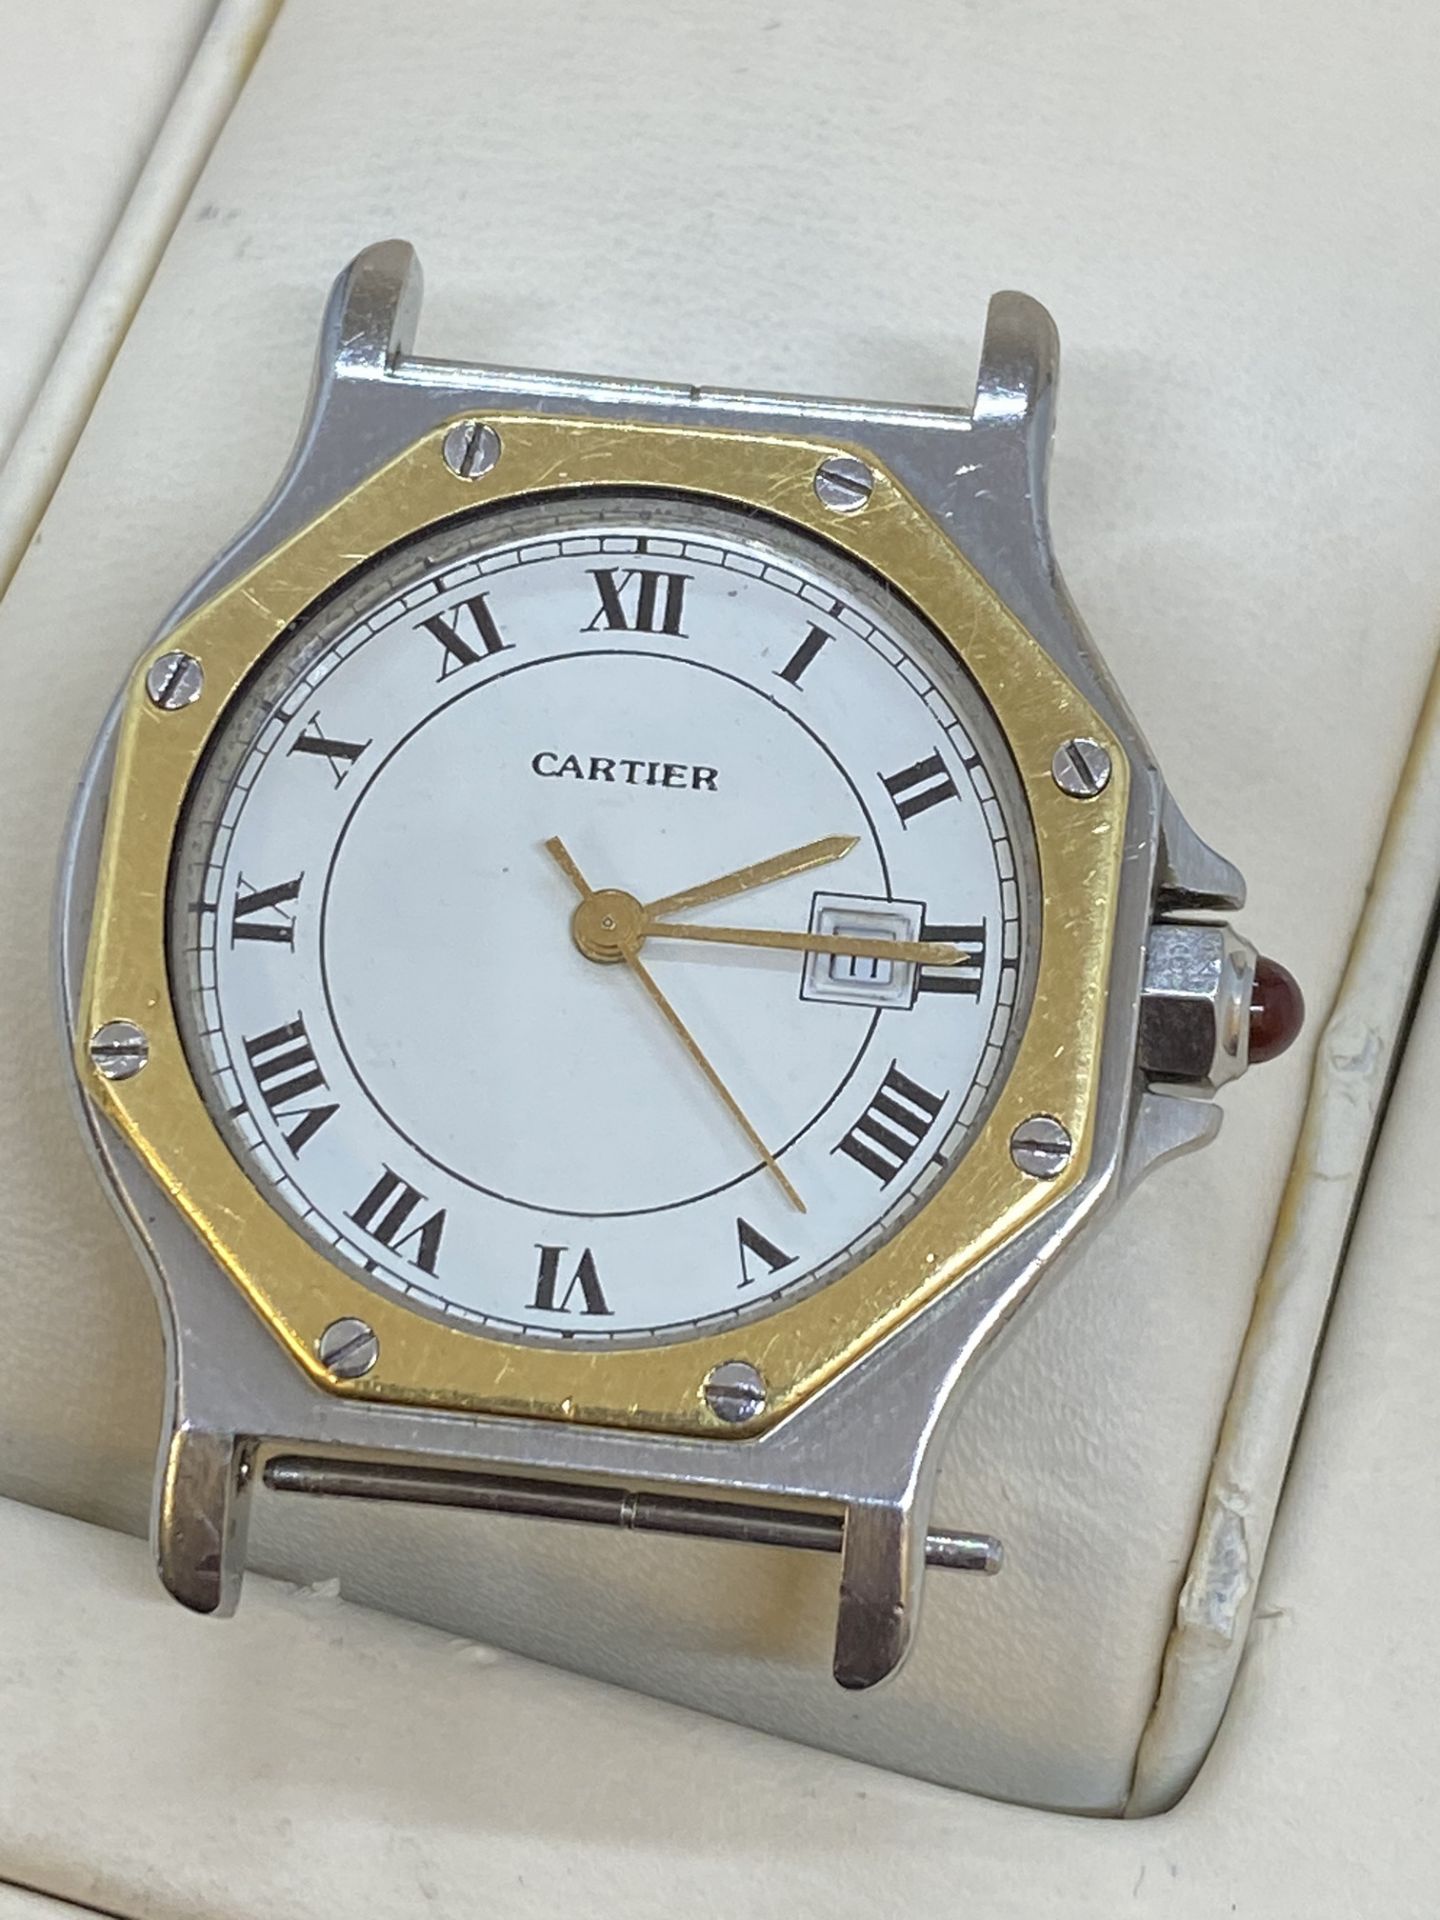 CARTIER GOLD & STEEL AUTOMATIC WATCH - NO STRAP